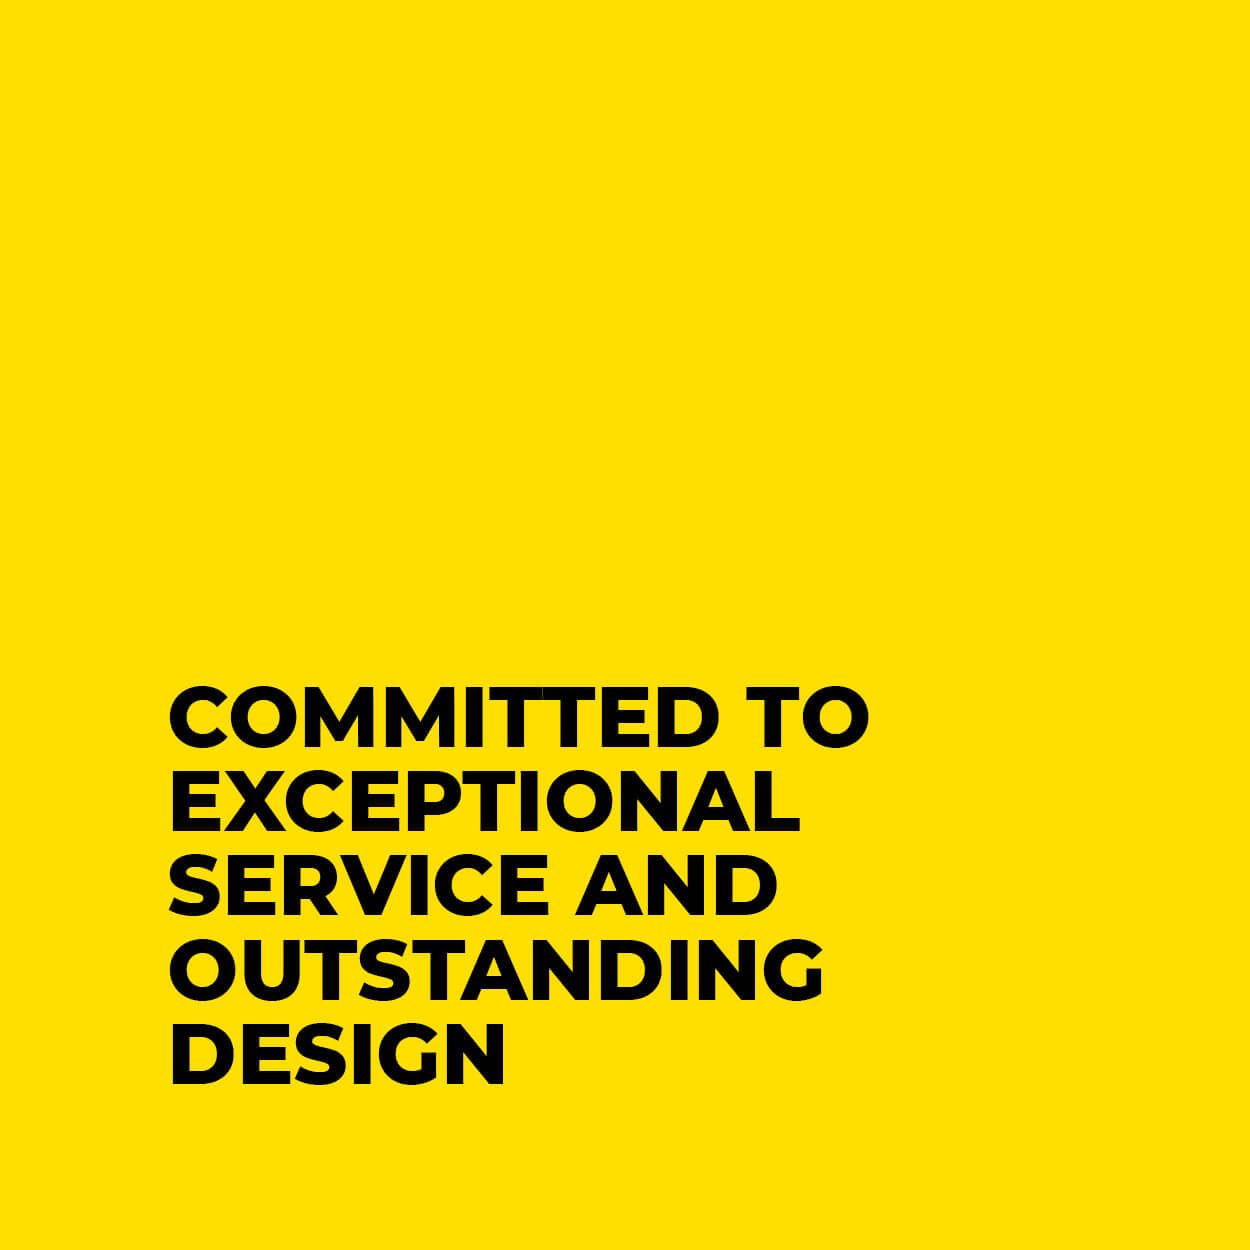 Bold black text on a bright yellow background reads "committed to exceptional service and outstanding design in Newcastle." The text is centered and uses uppercase letters for emphasis.